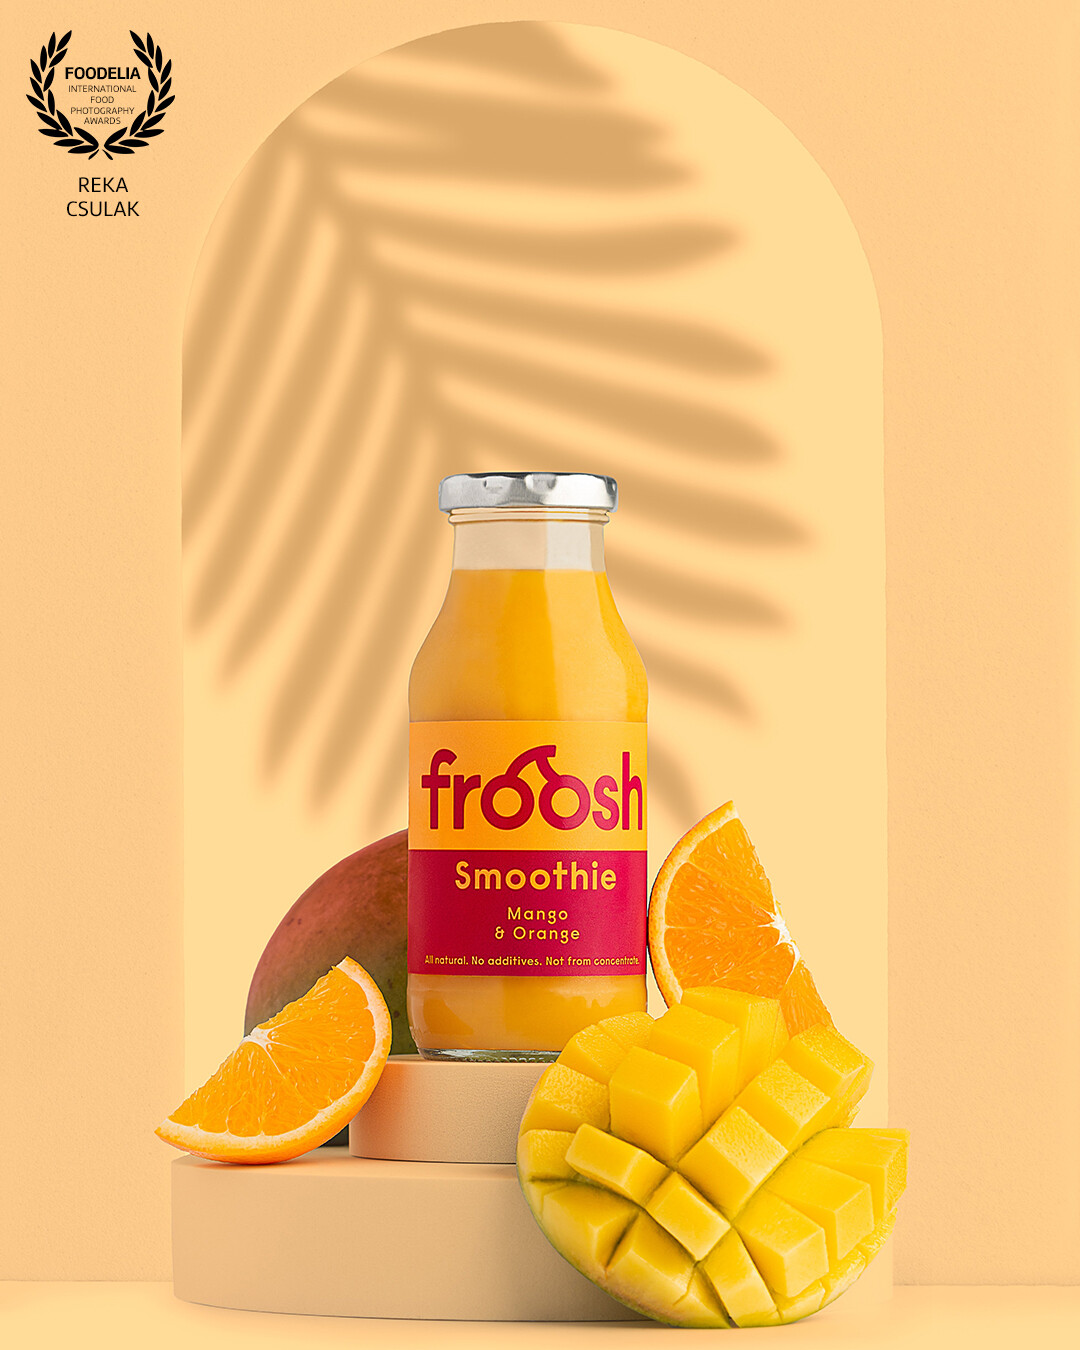 Product photo with geometric shapes and a limited colour palette focuses on the freshness this particular flavour combination brings to the consumer.